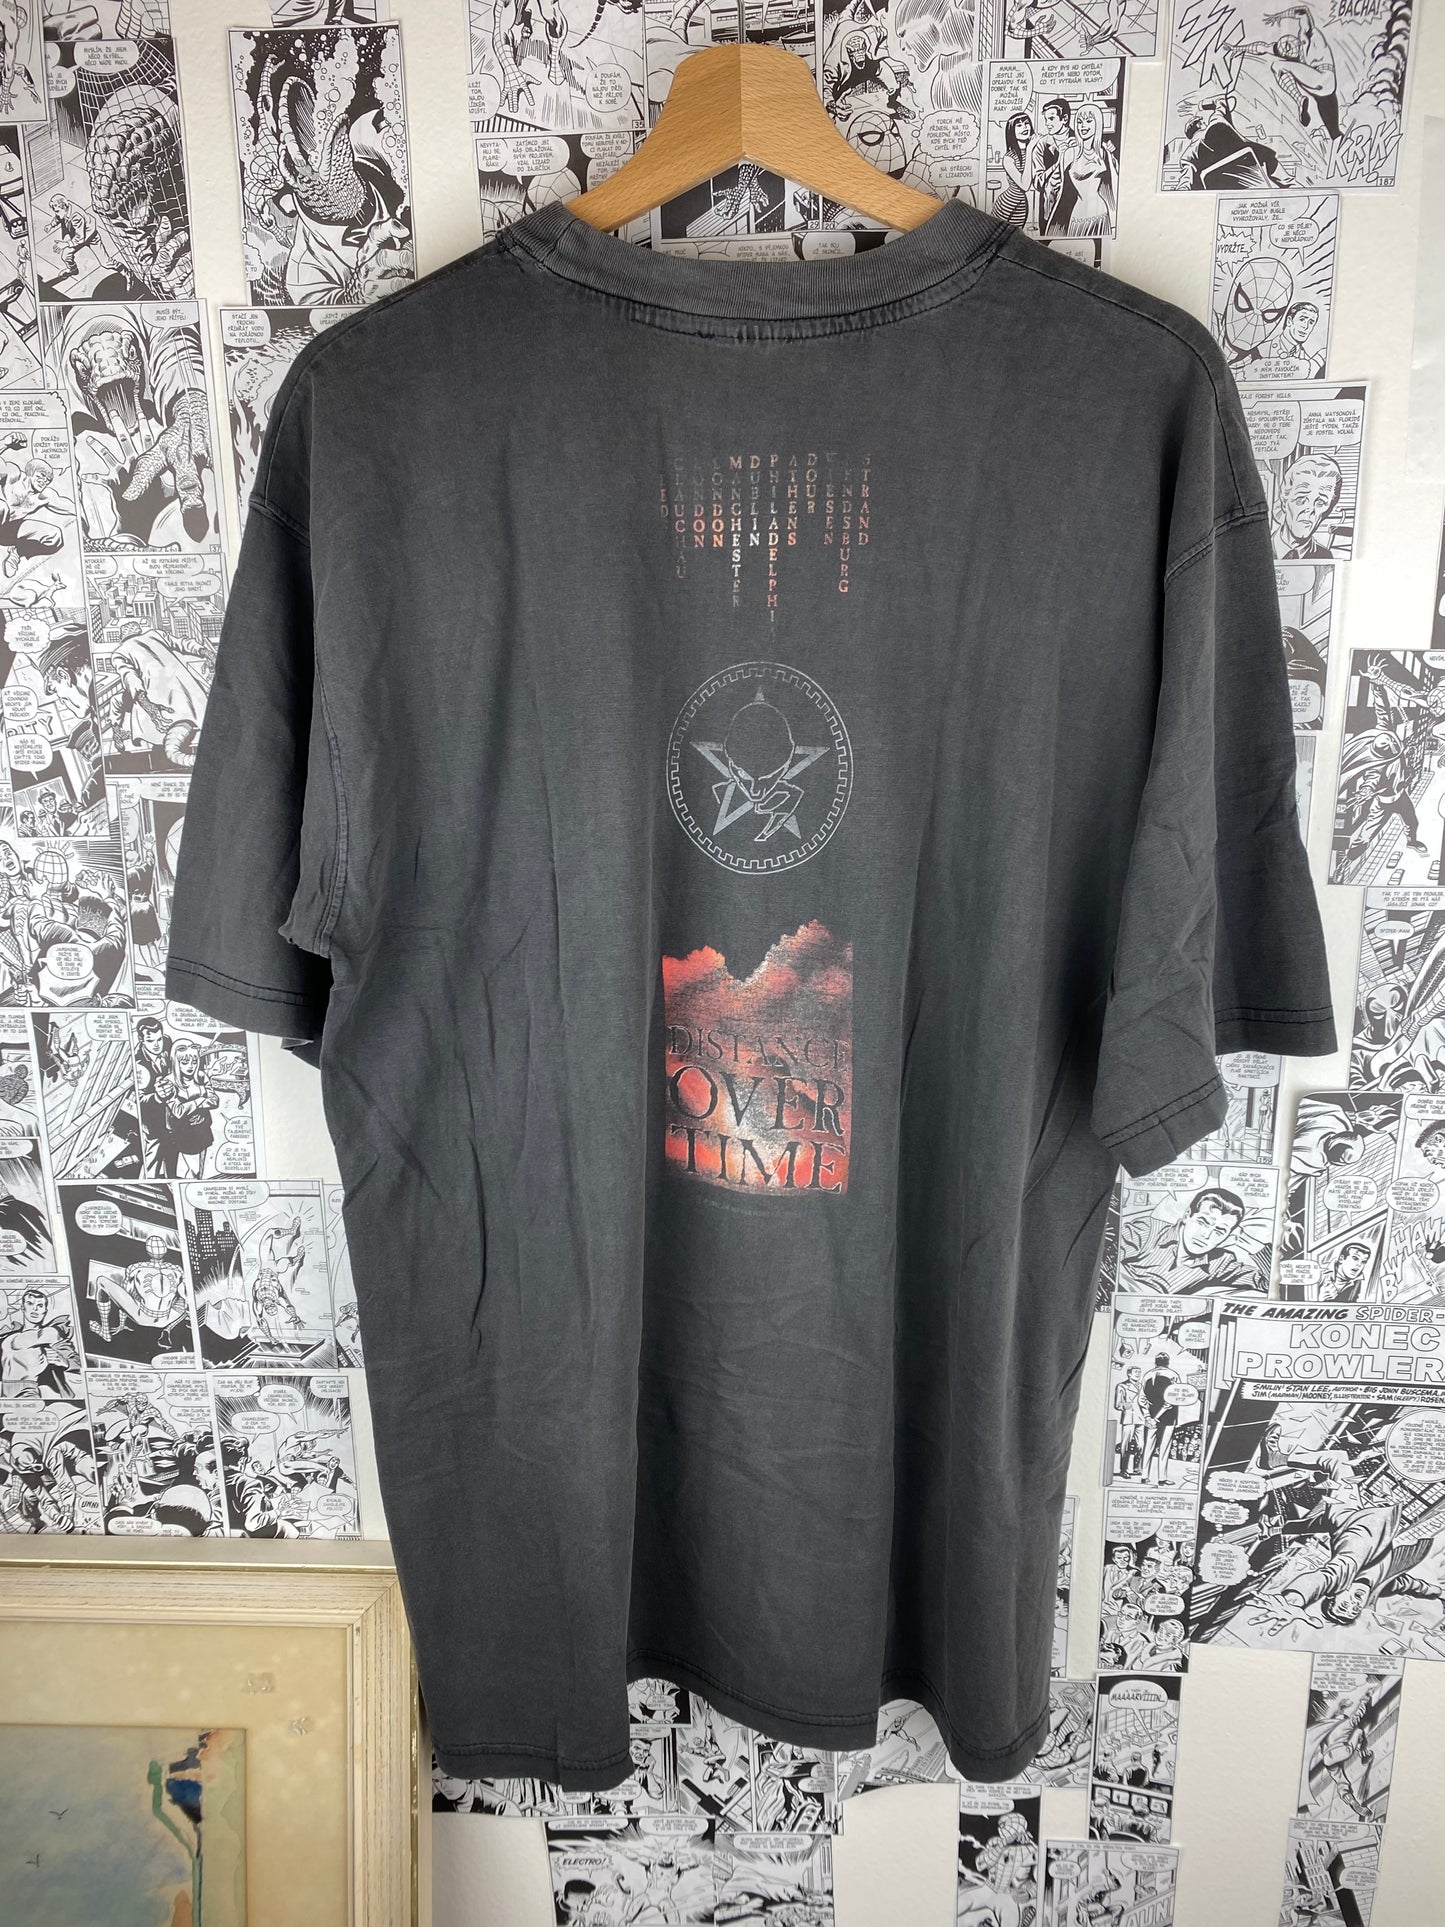 Vintage Sisters of Mercy “Distance Over Time” 1997 t-shirt - size XL